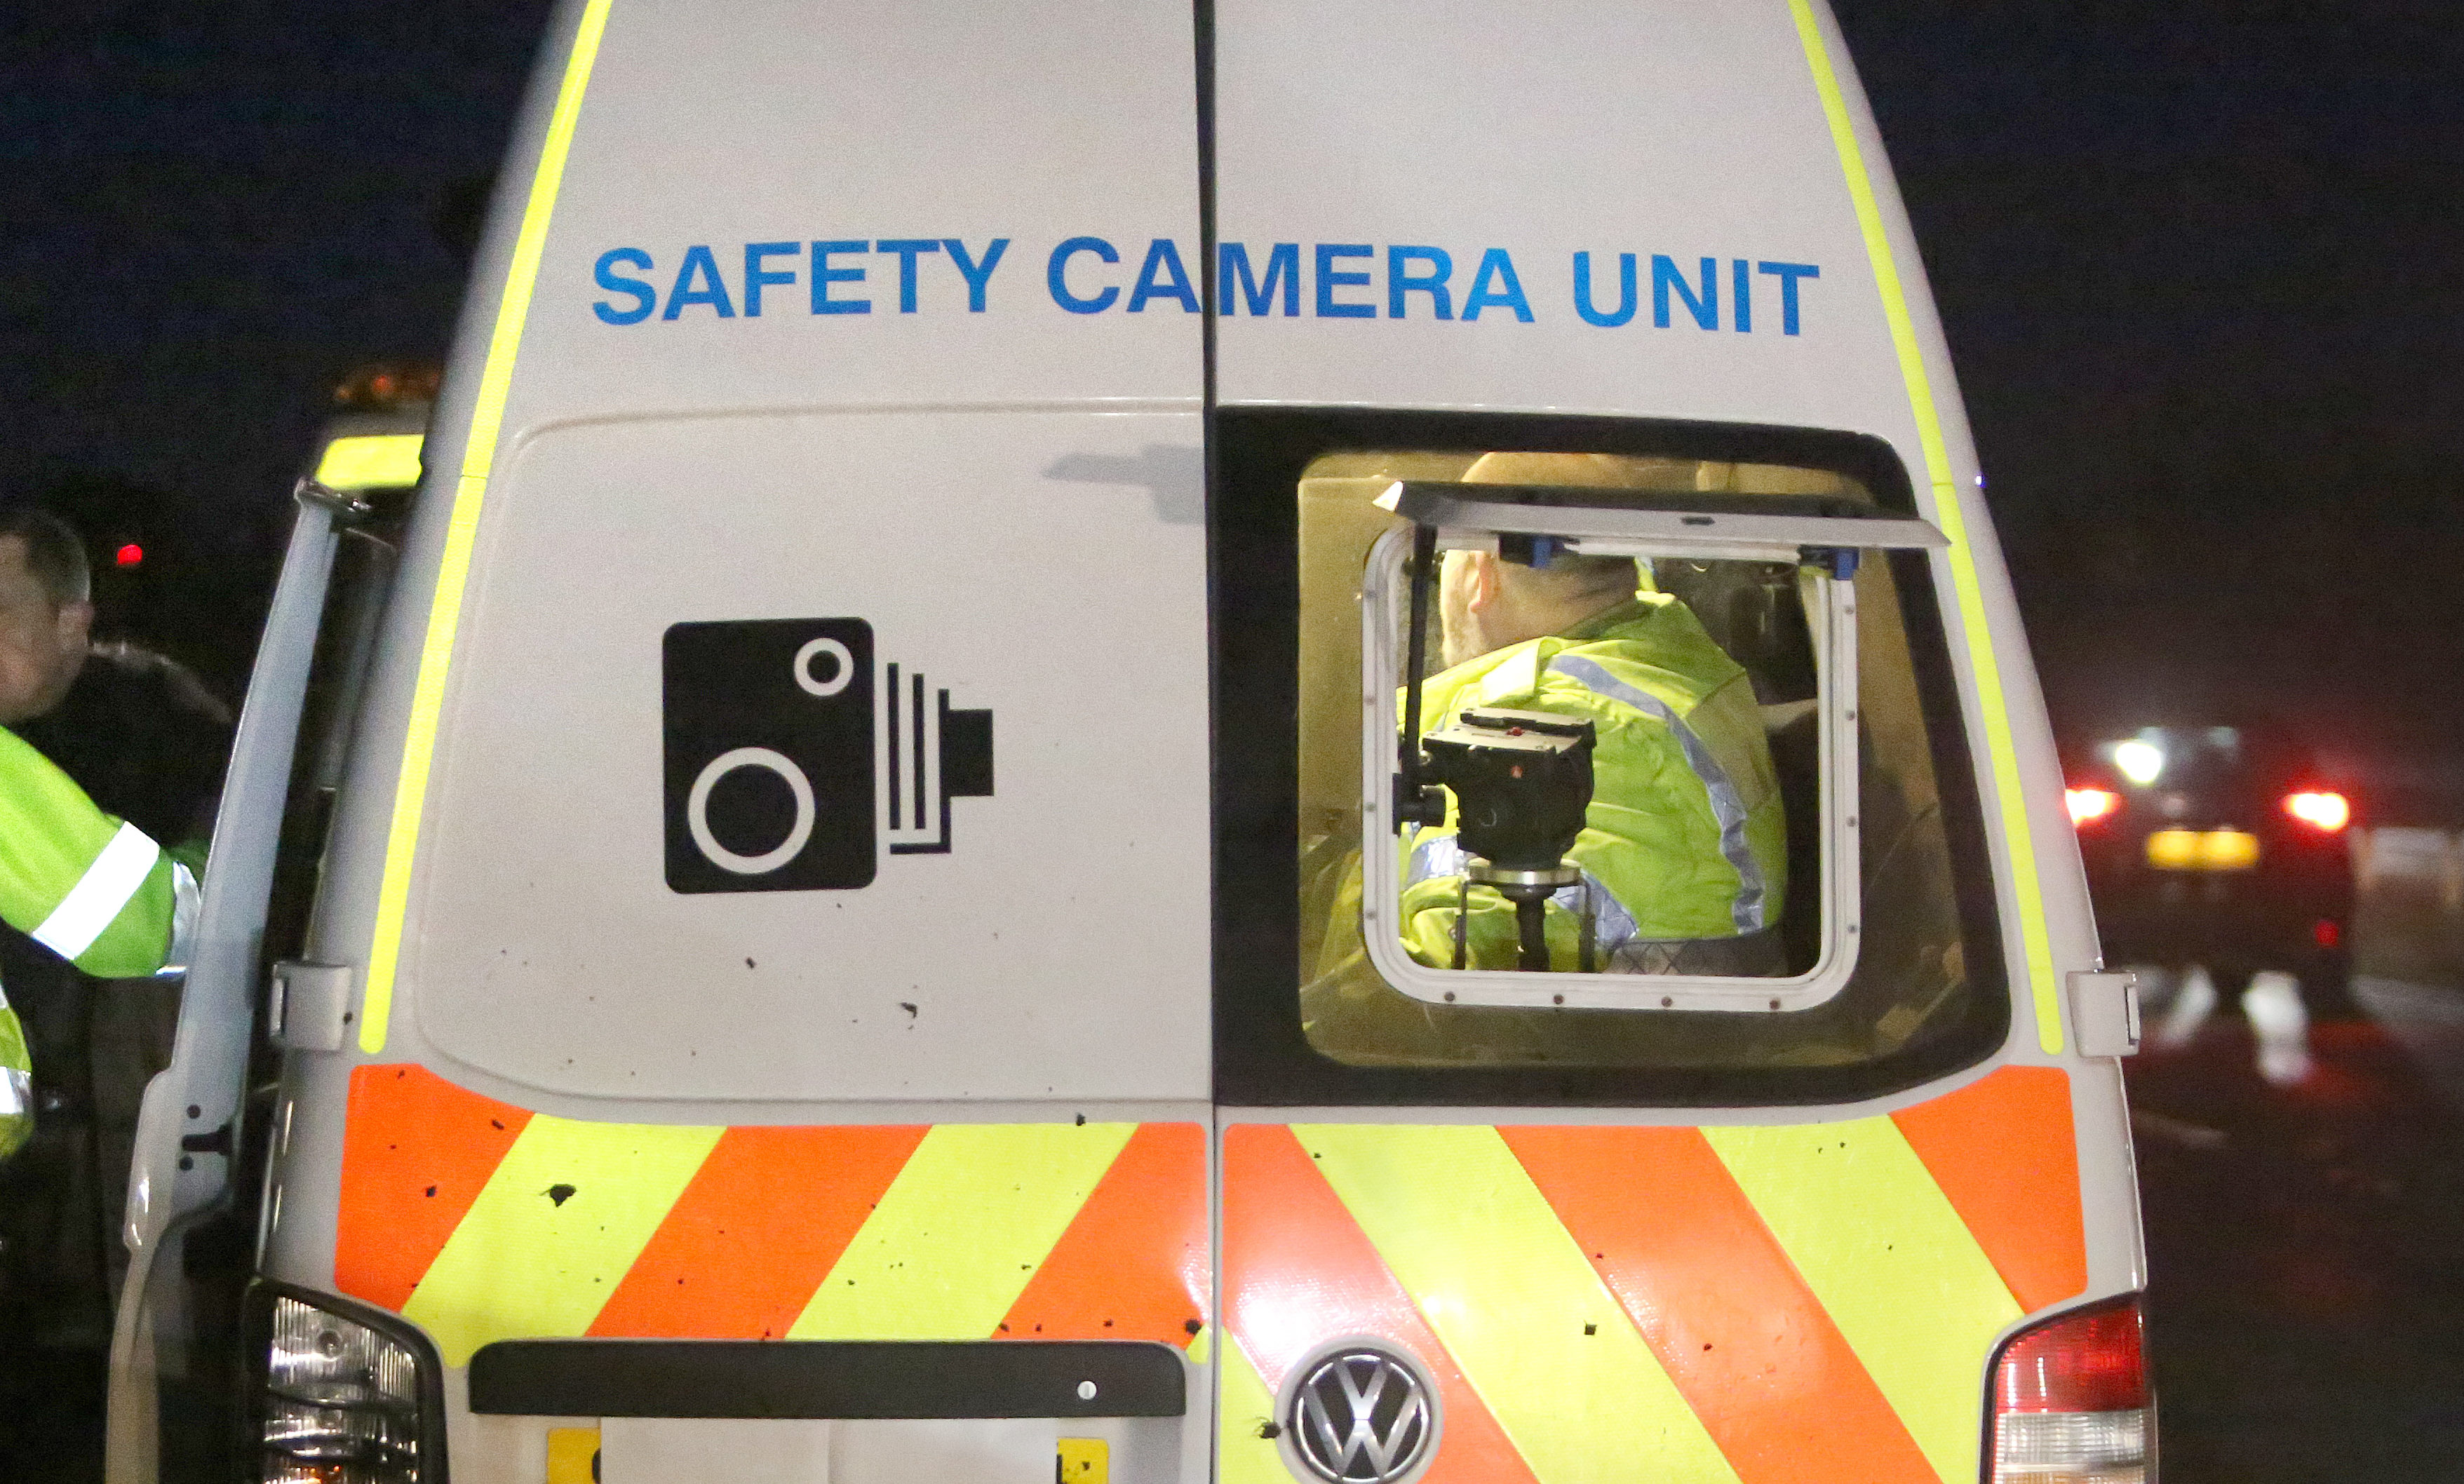 A Safety Camera Unit in action.